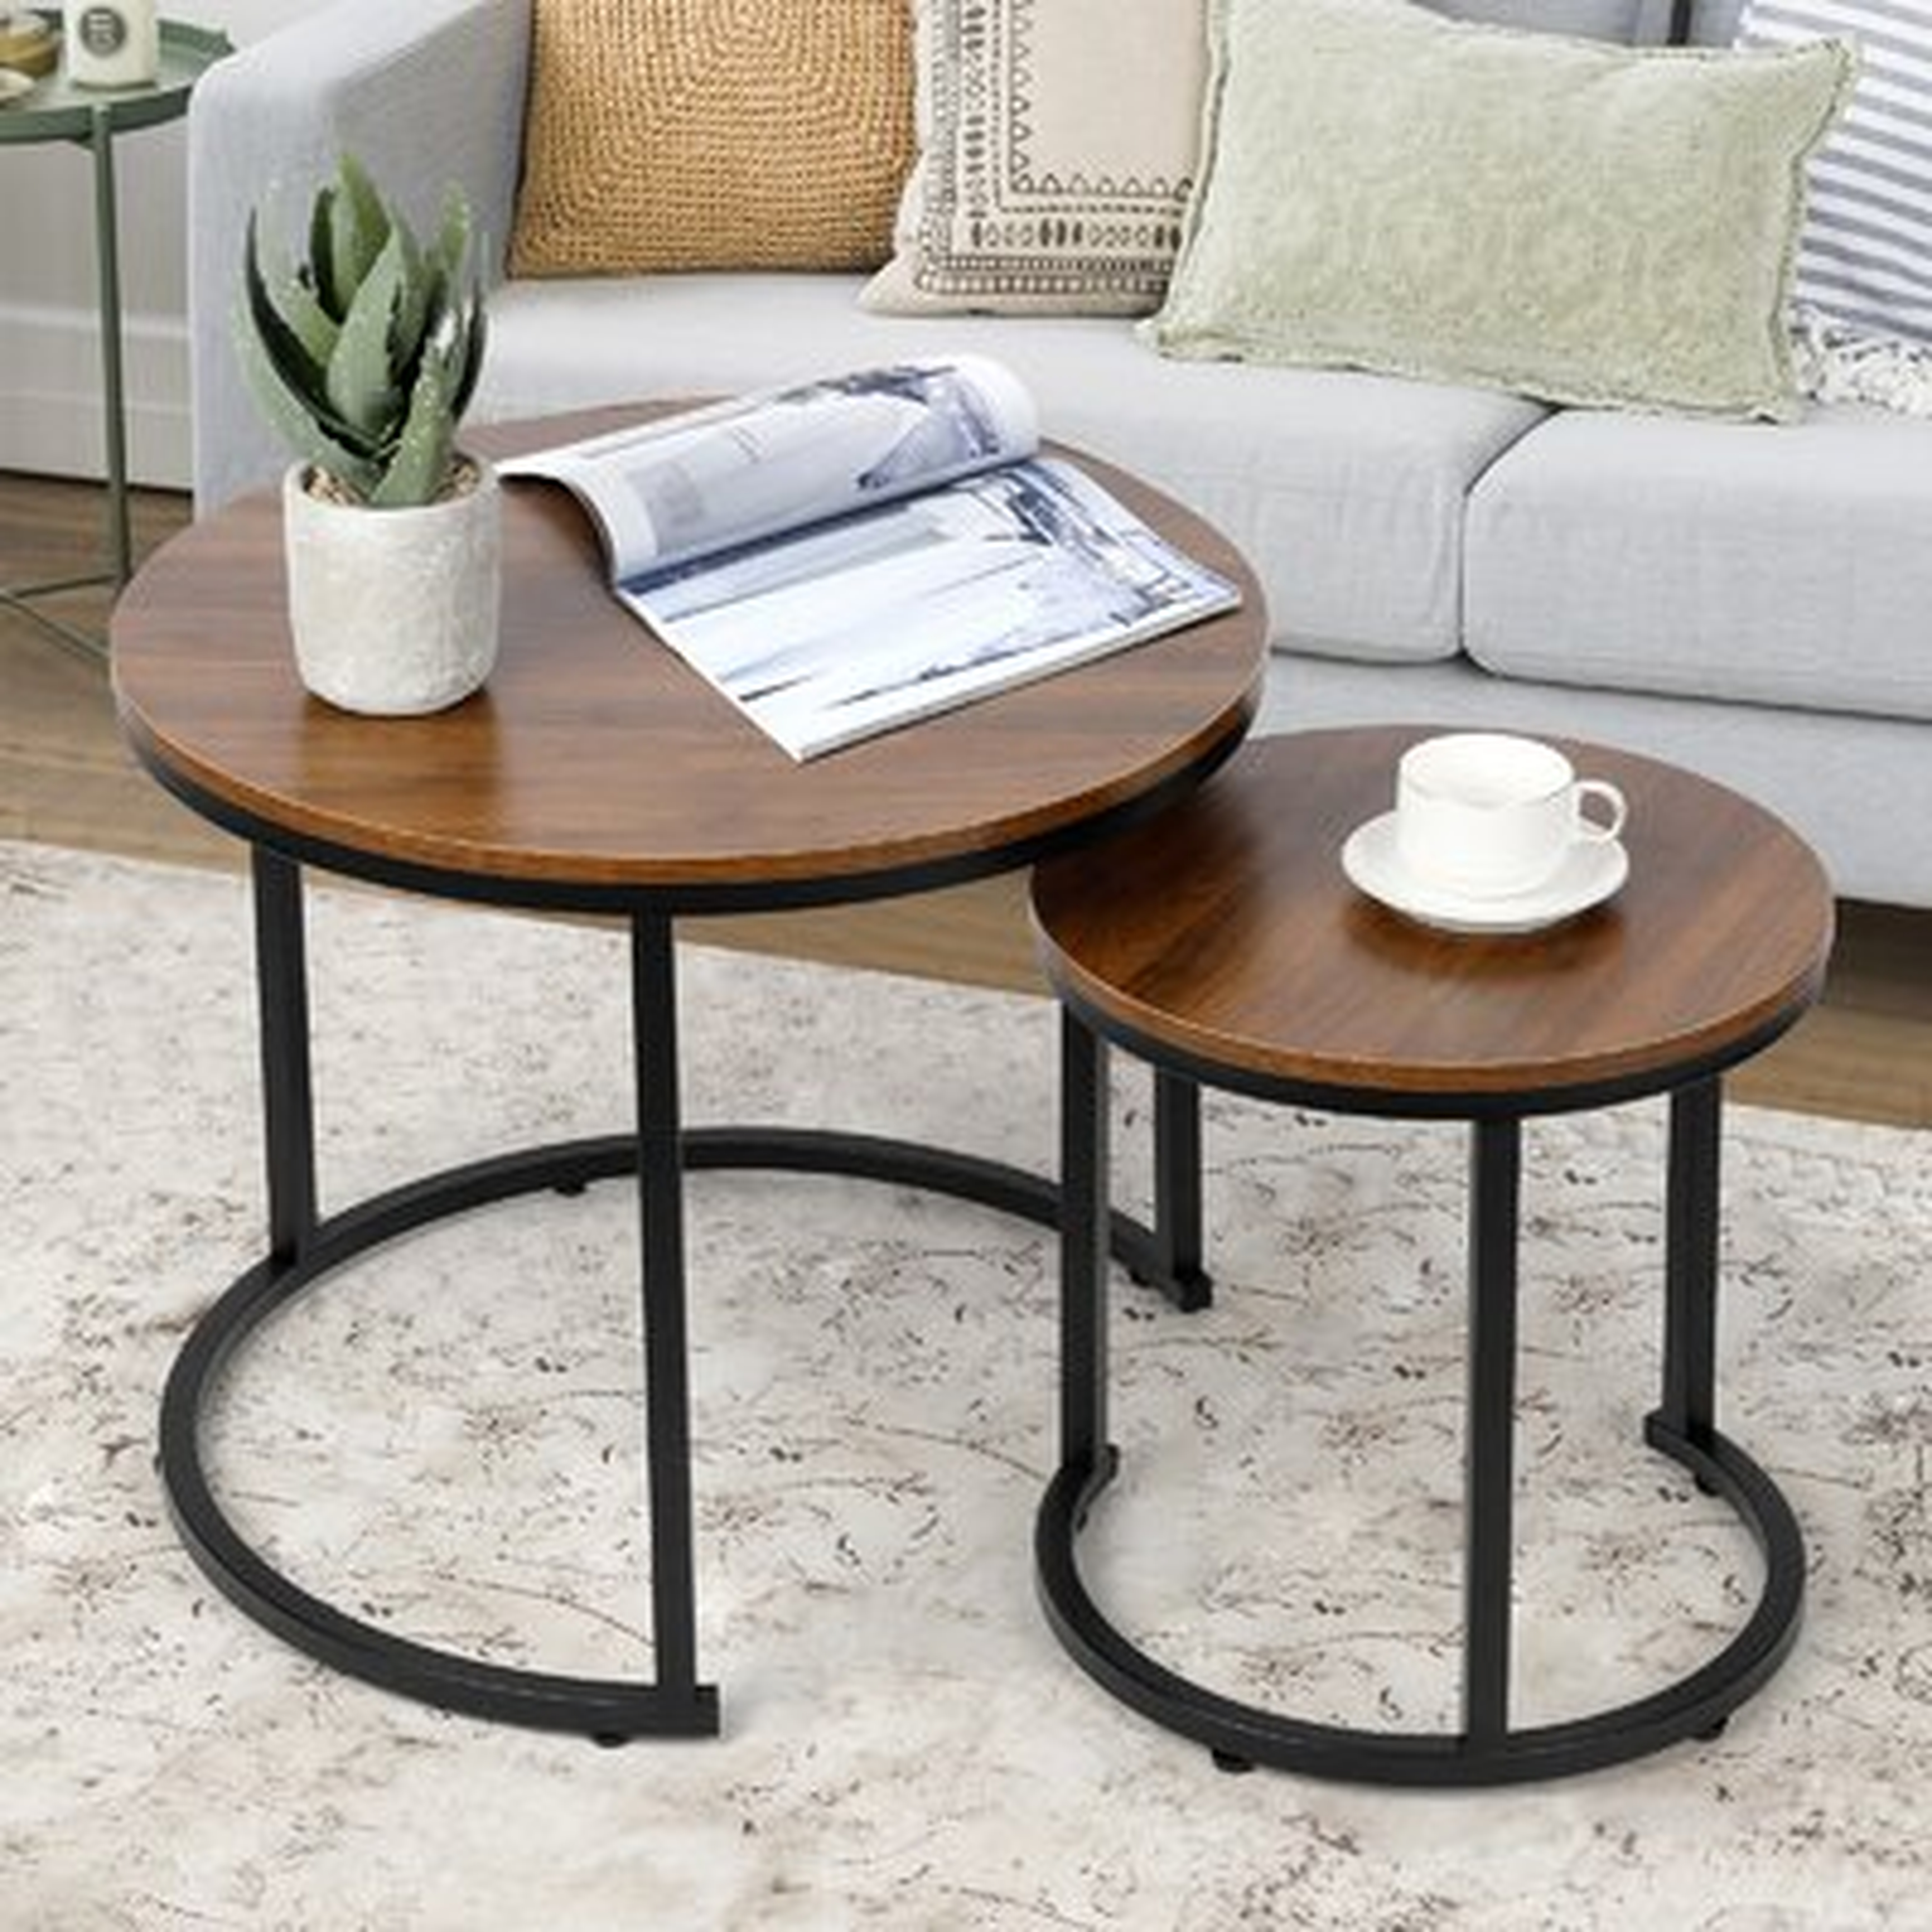 Modern Nesting Coffee Table Set Of 2 For Living Room Balcony Office, Round Wood Accent Side Coffee Tables With Sturdy Metal Frame, Easy Assembly(walnut) - Wayfair